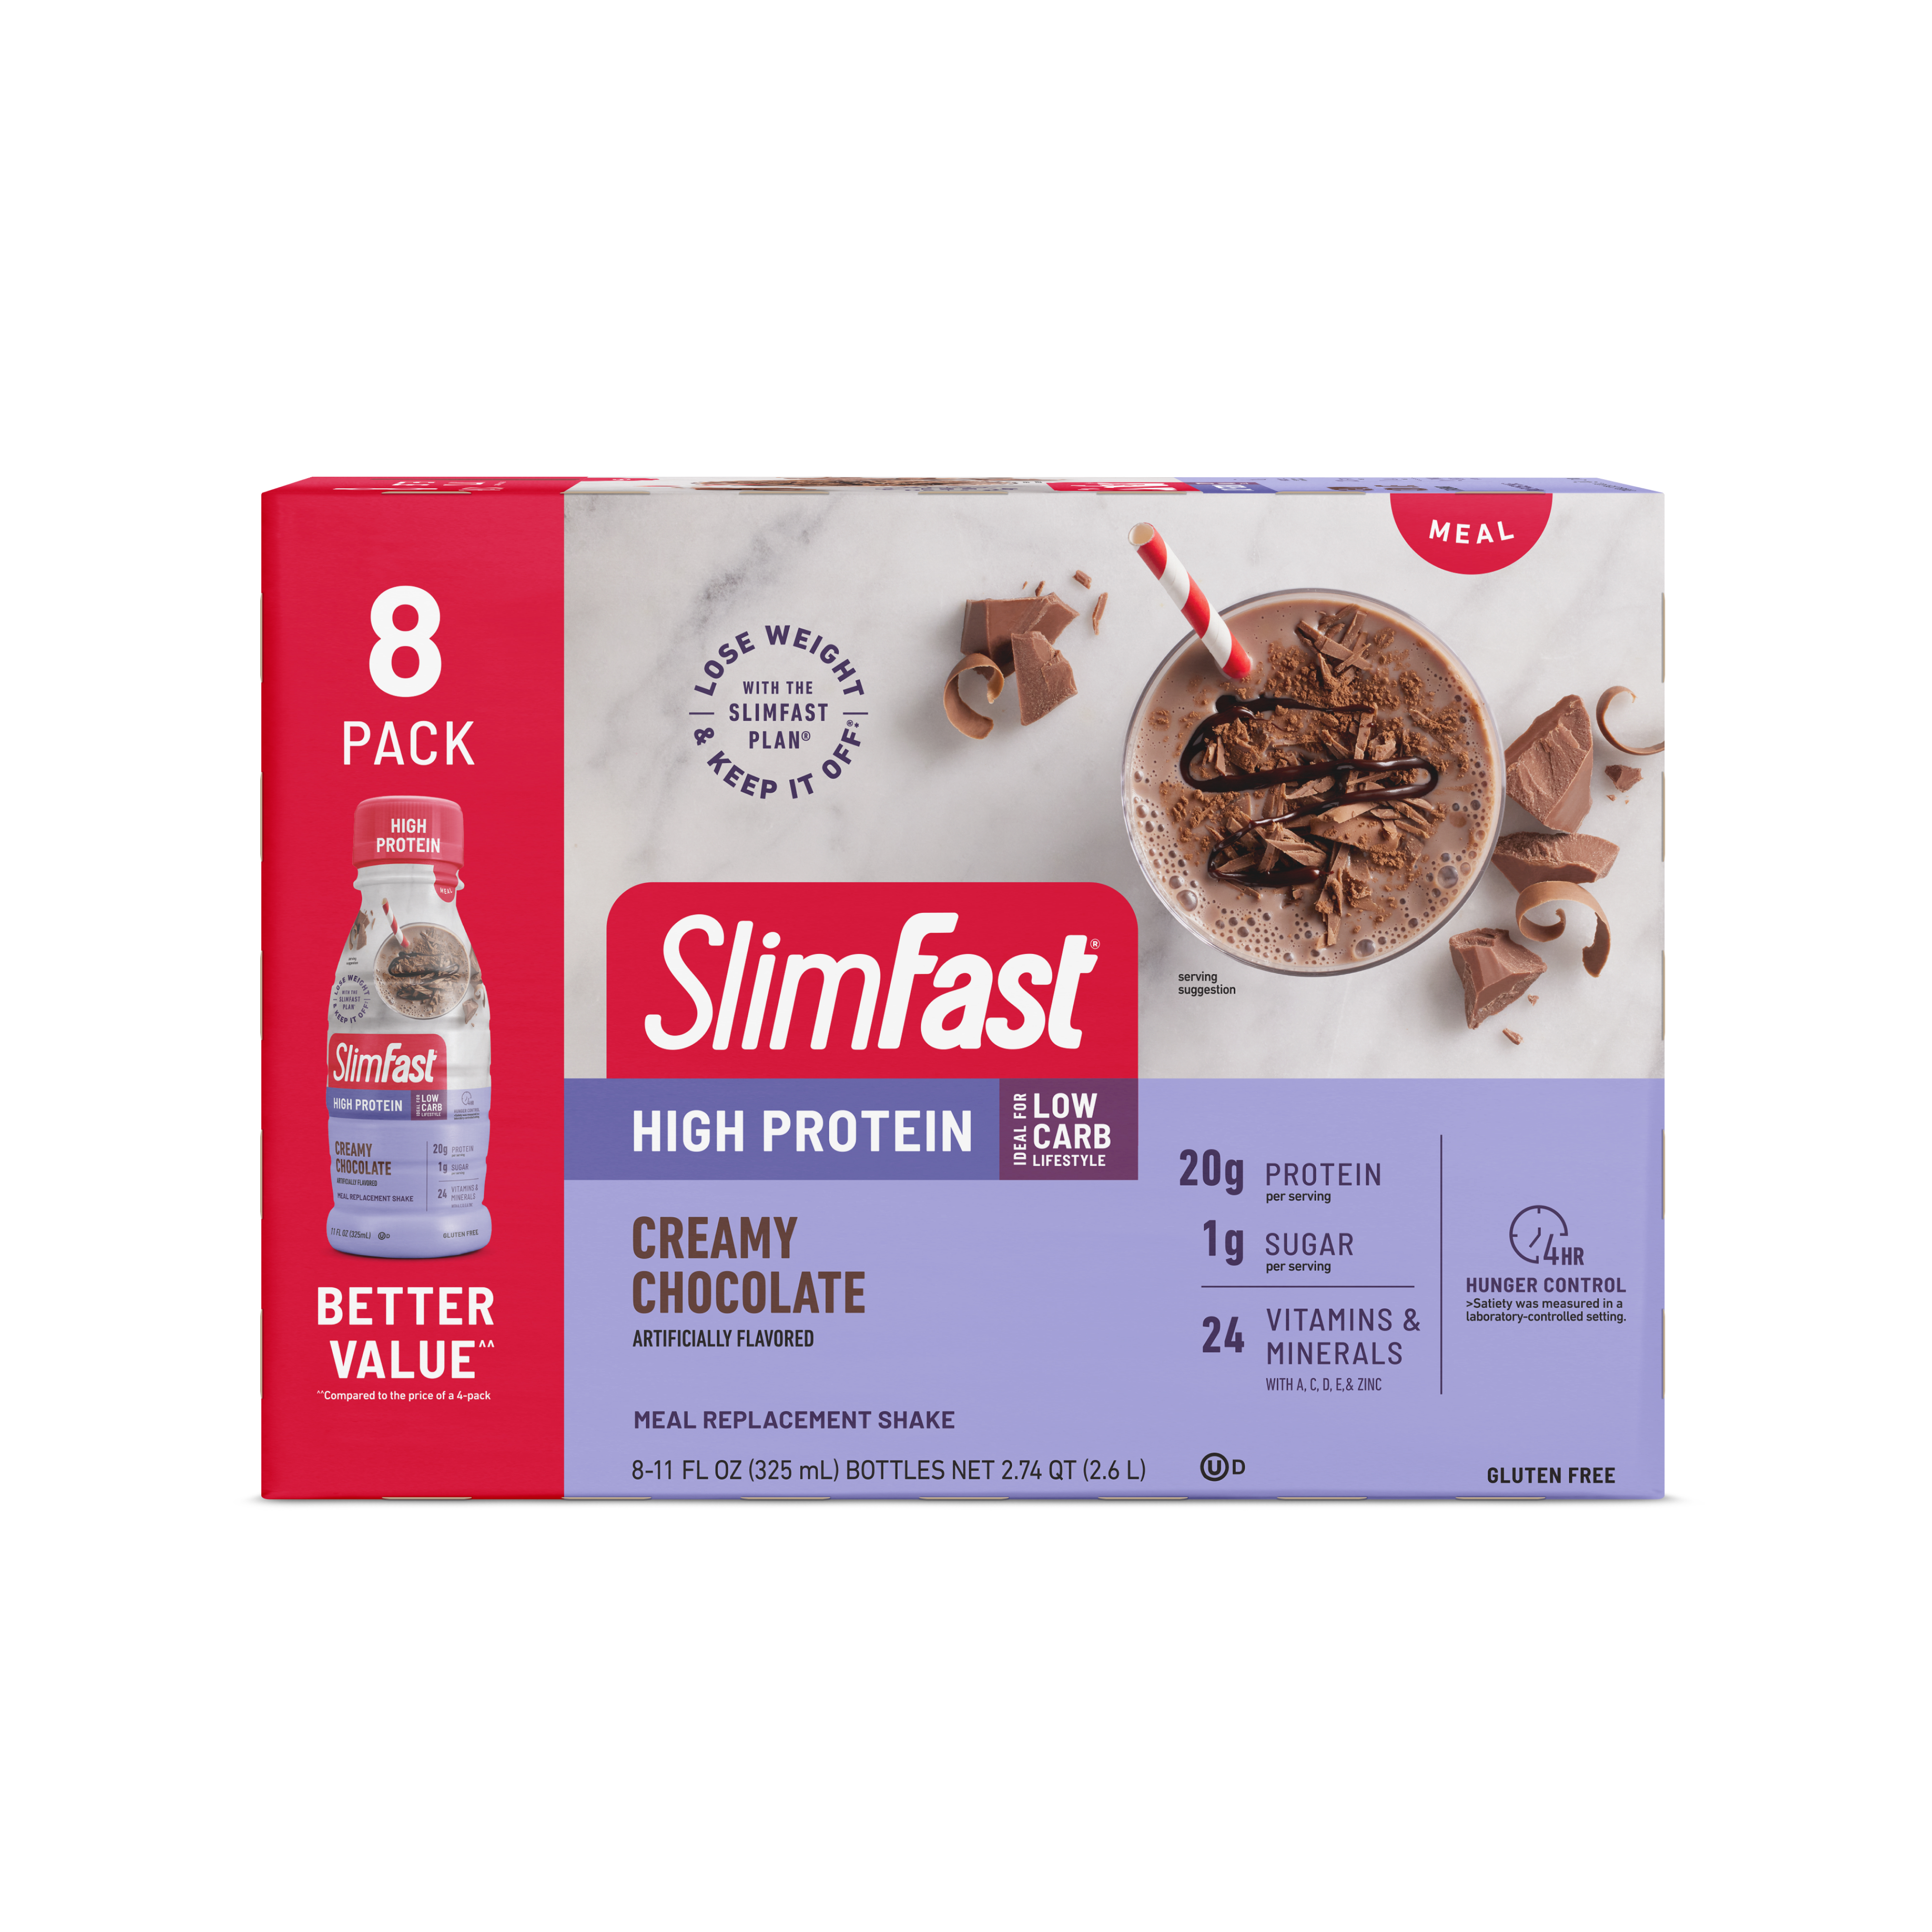 SlimFast High Protein Shake Meal Replacement Shake, Creamy Chocolate, 11 Fl Oz Bottle, 8 Pack - image 1 of 10